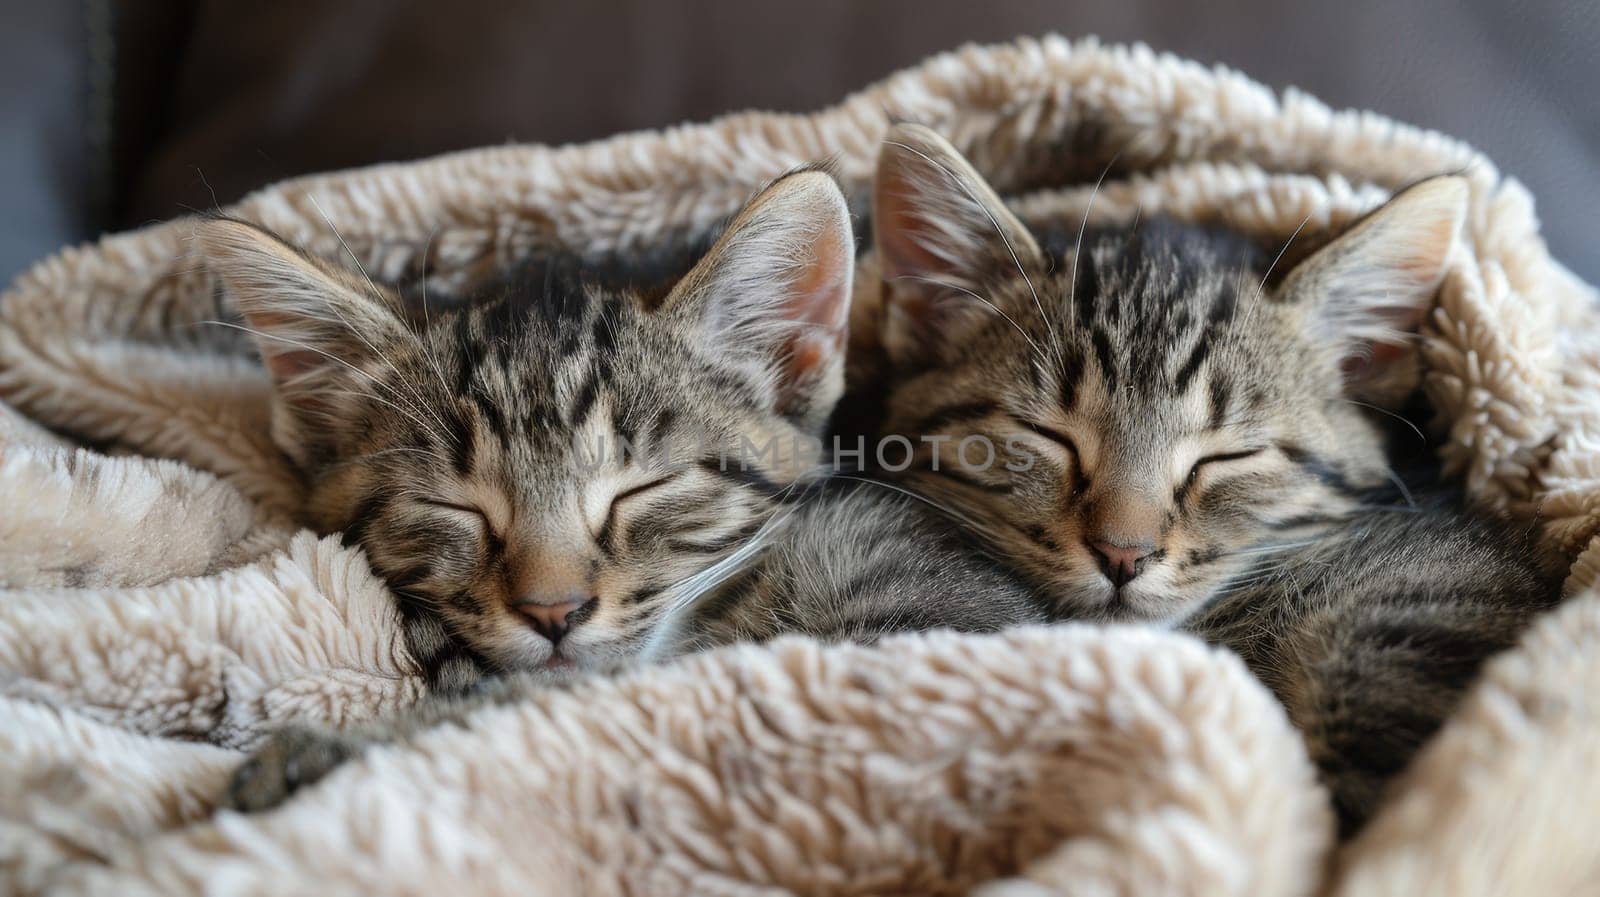 Two kittens are sleeping together on a blanket in the sun, AI by starush